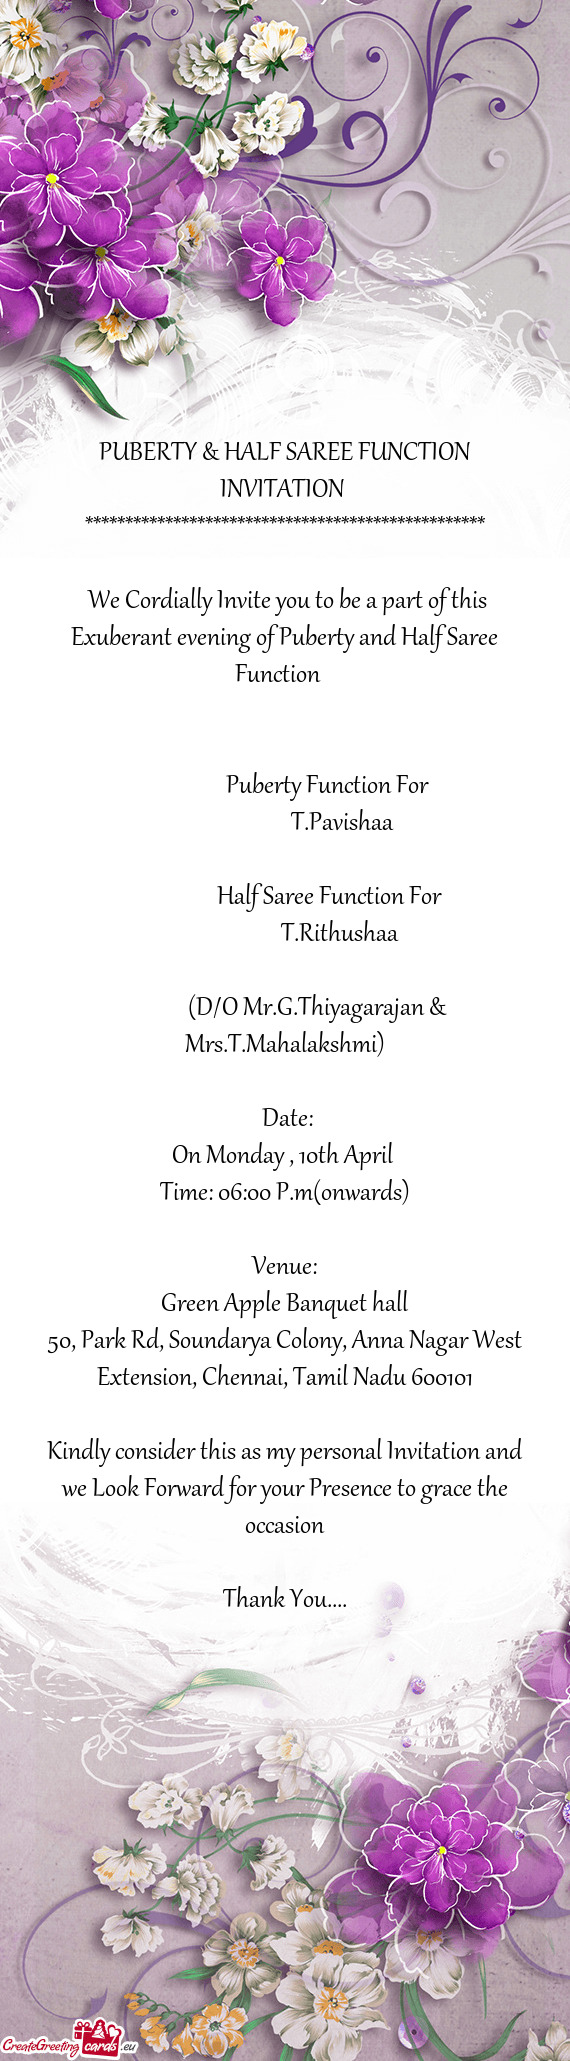 We Cordially Invite you to be a part of this Exuberant evening of Puberty and Half Saree Function